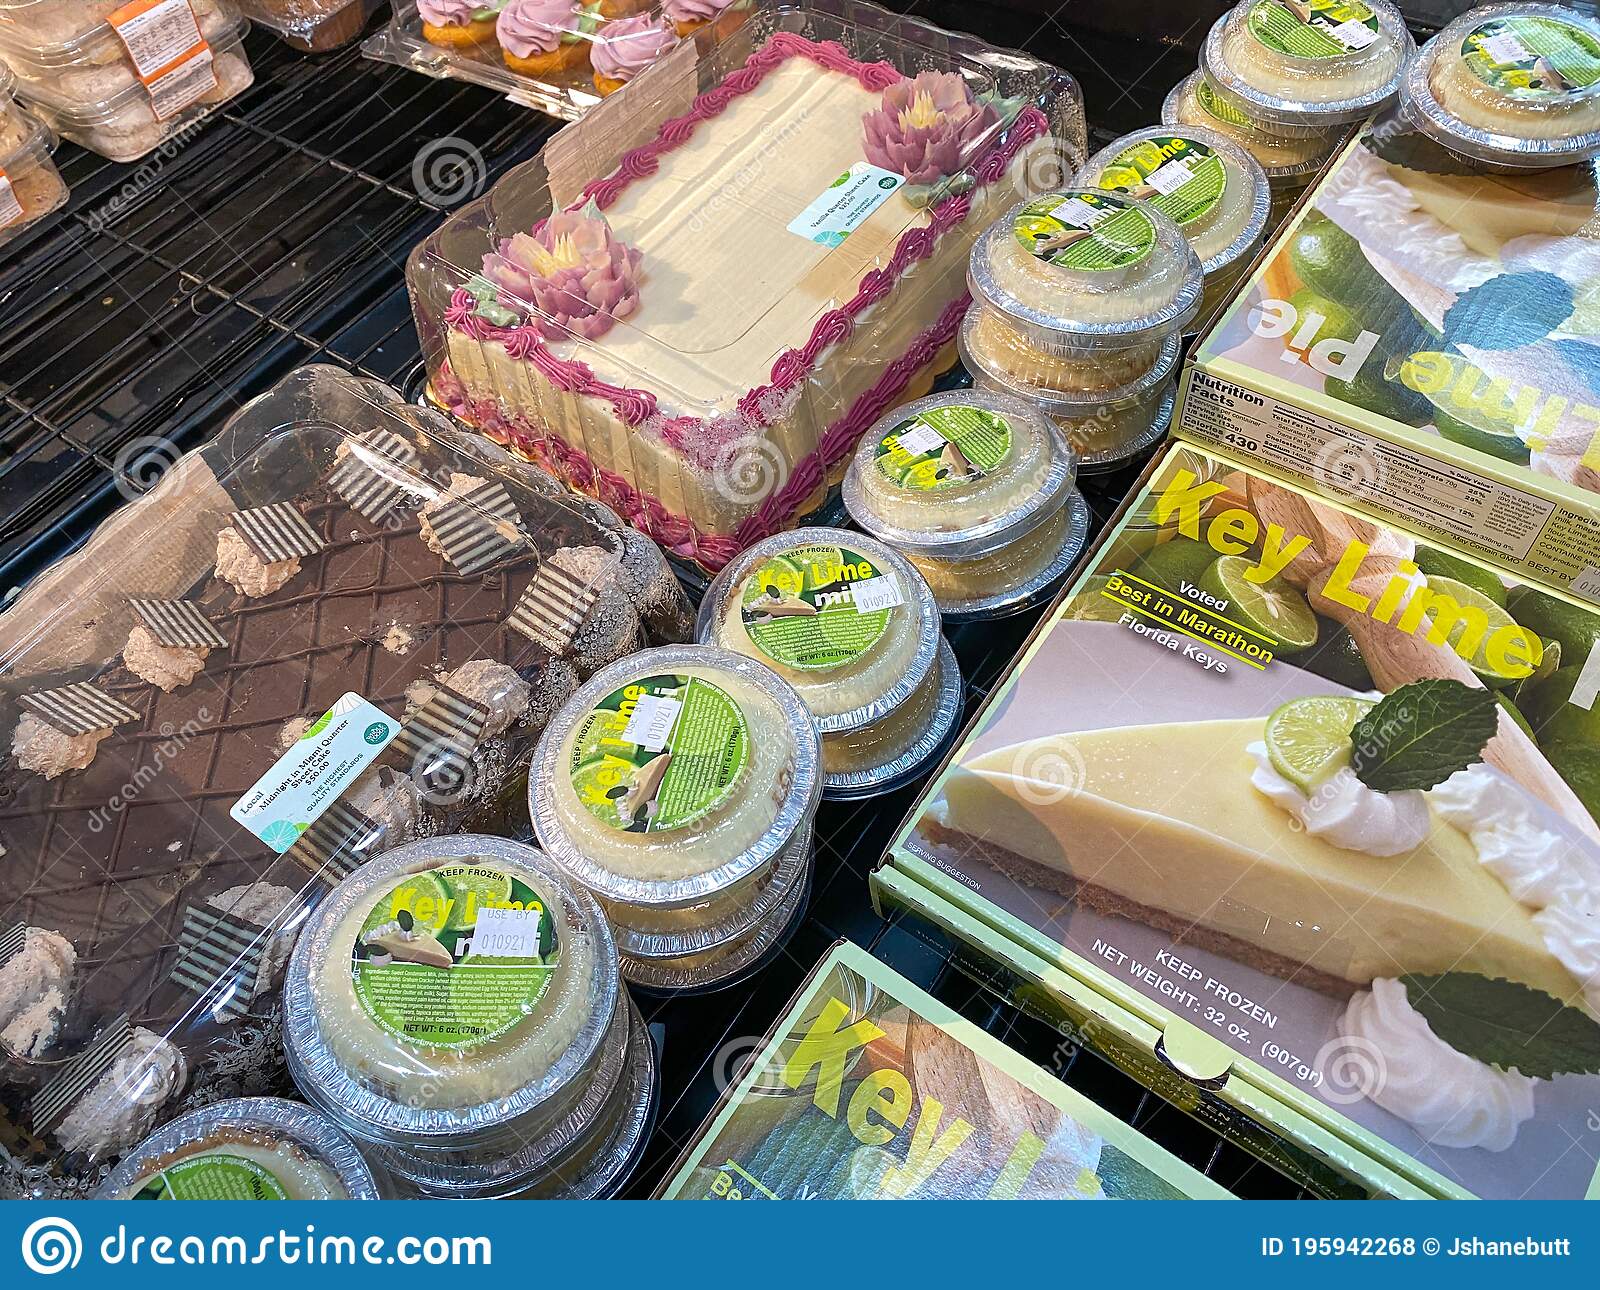 A Display Of Cakes And Key Lime Pies At A Whole Foods Market Grocery ...